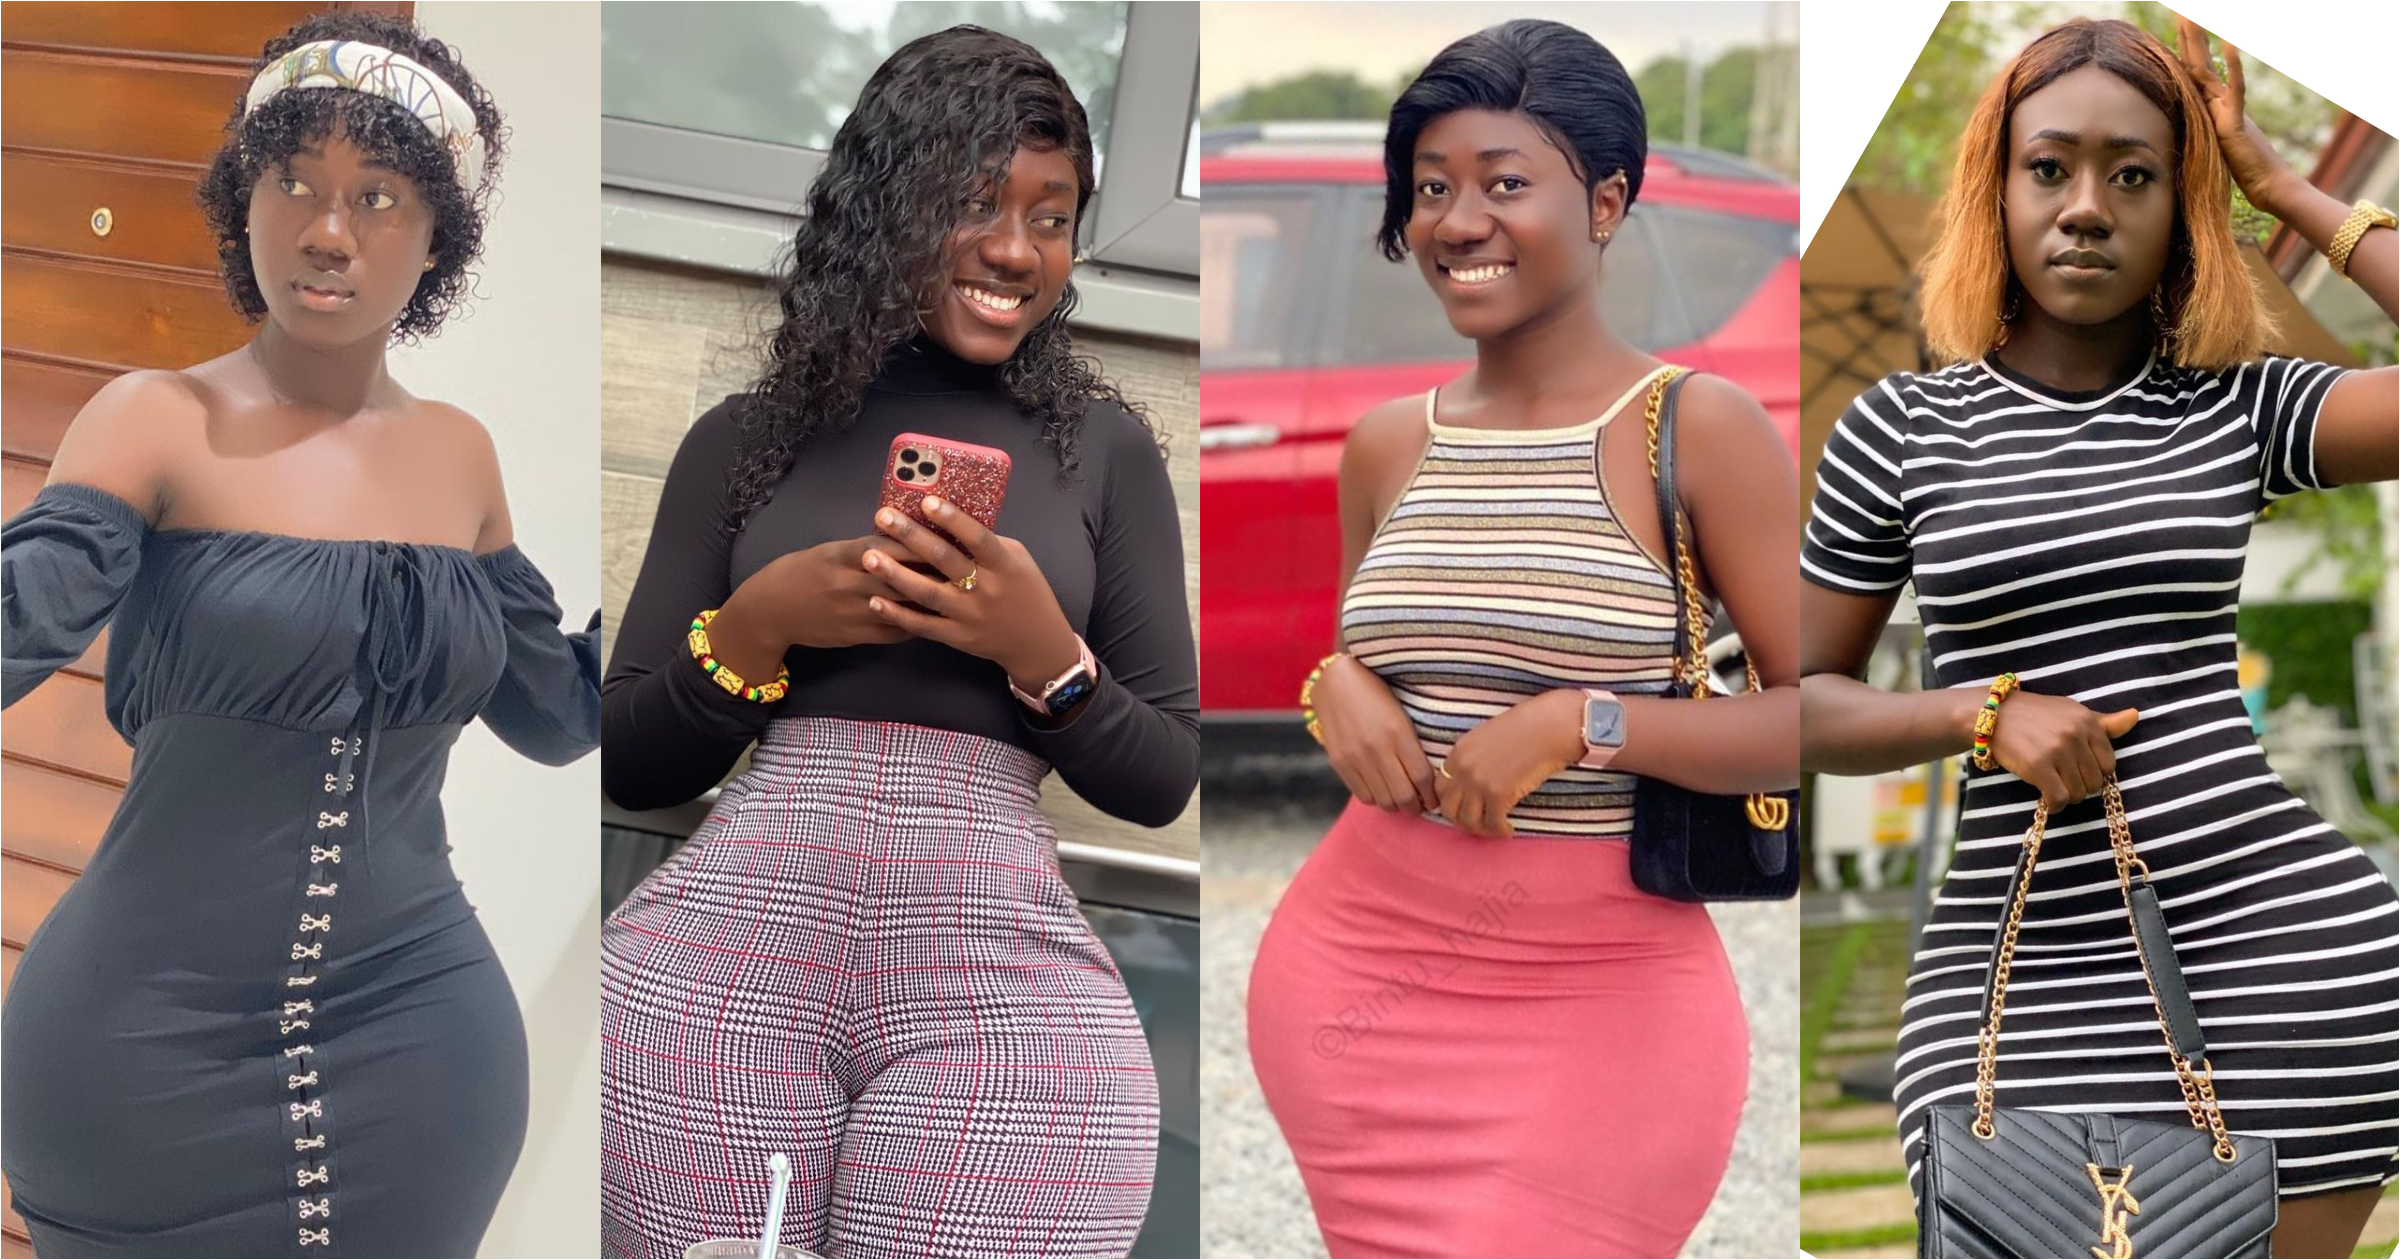 Hajia Bintu: Tik Tok star says her curves are natural from God